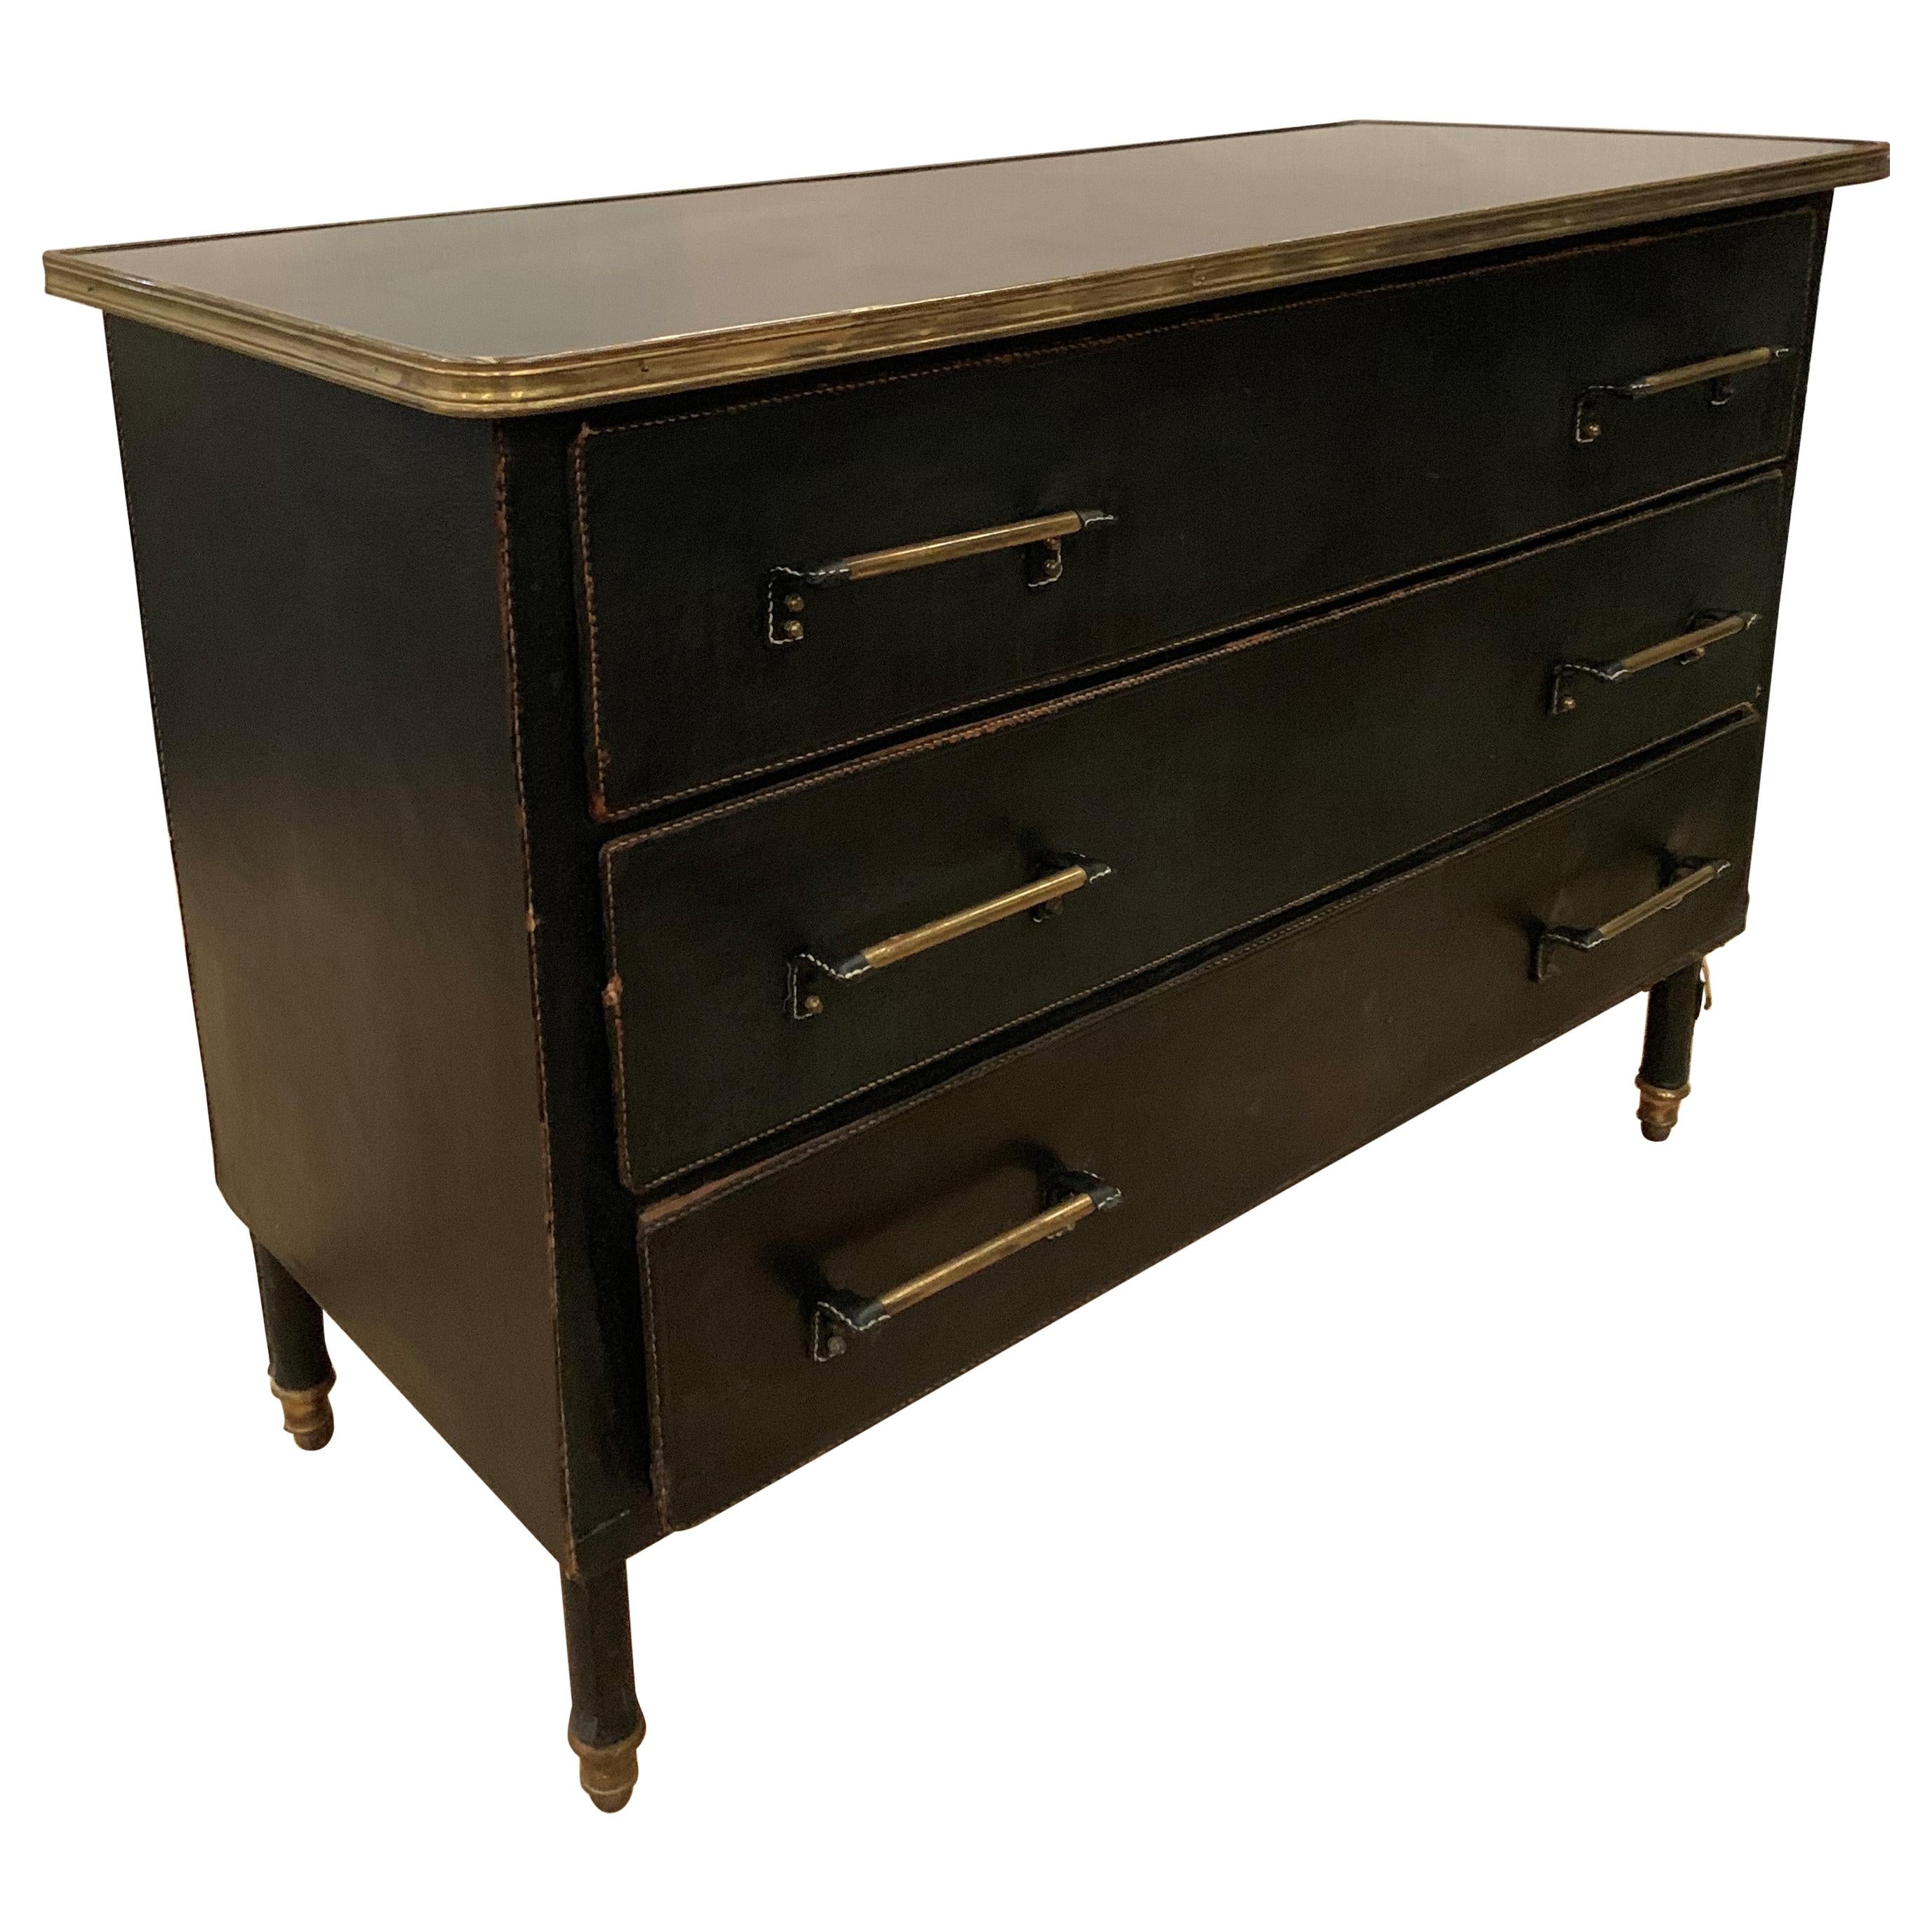 Jacques Adnet Large Black Stitched Leather and Brass Commode, French, 1950s For Sale